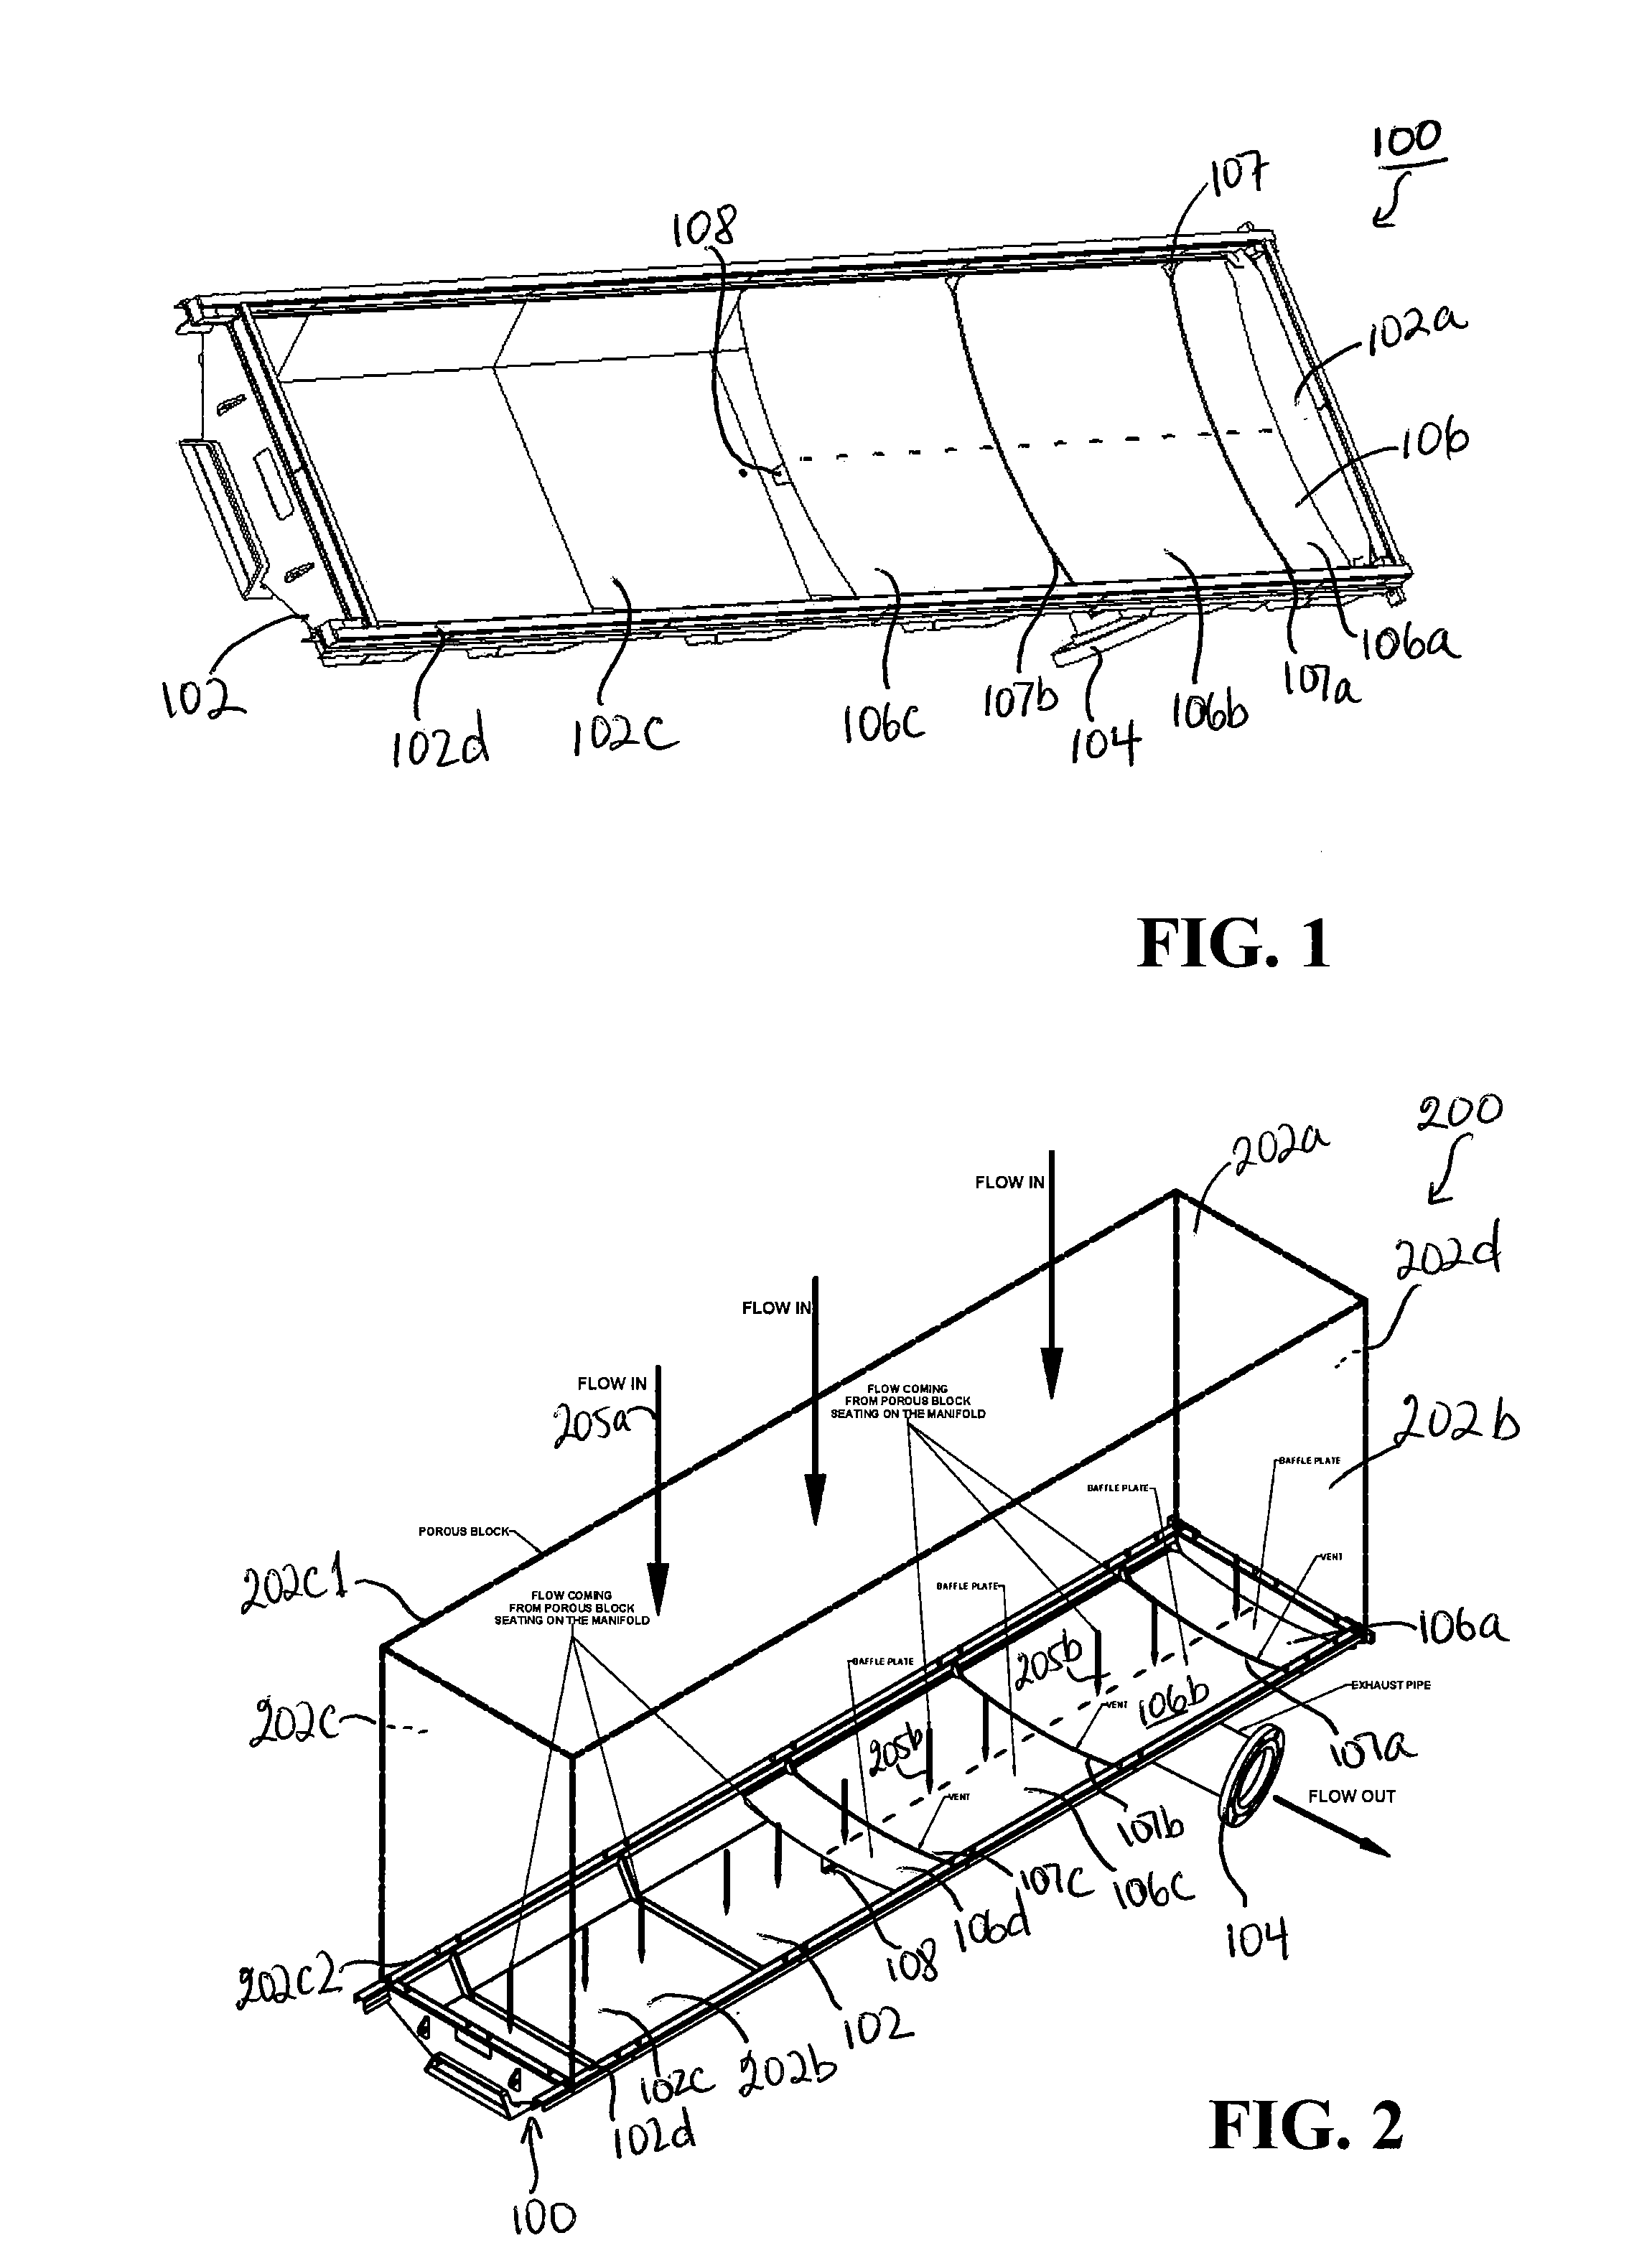 Manifold assembly for controlling gas flow and flow distribution in a fuel cell stack